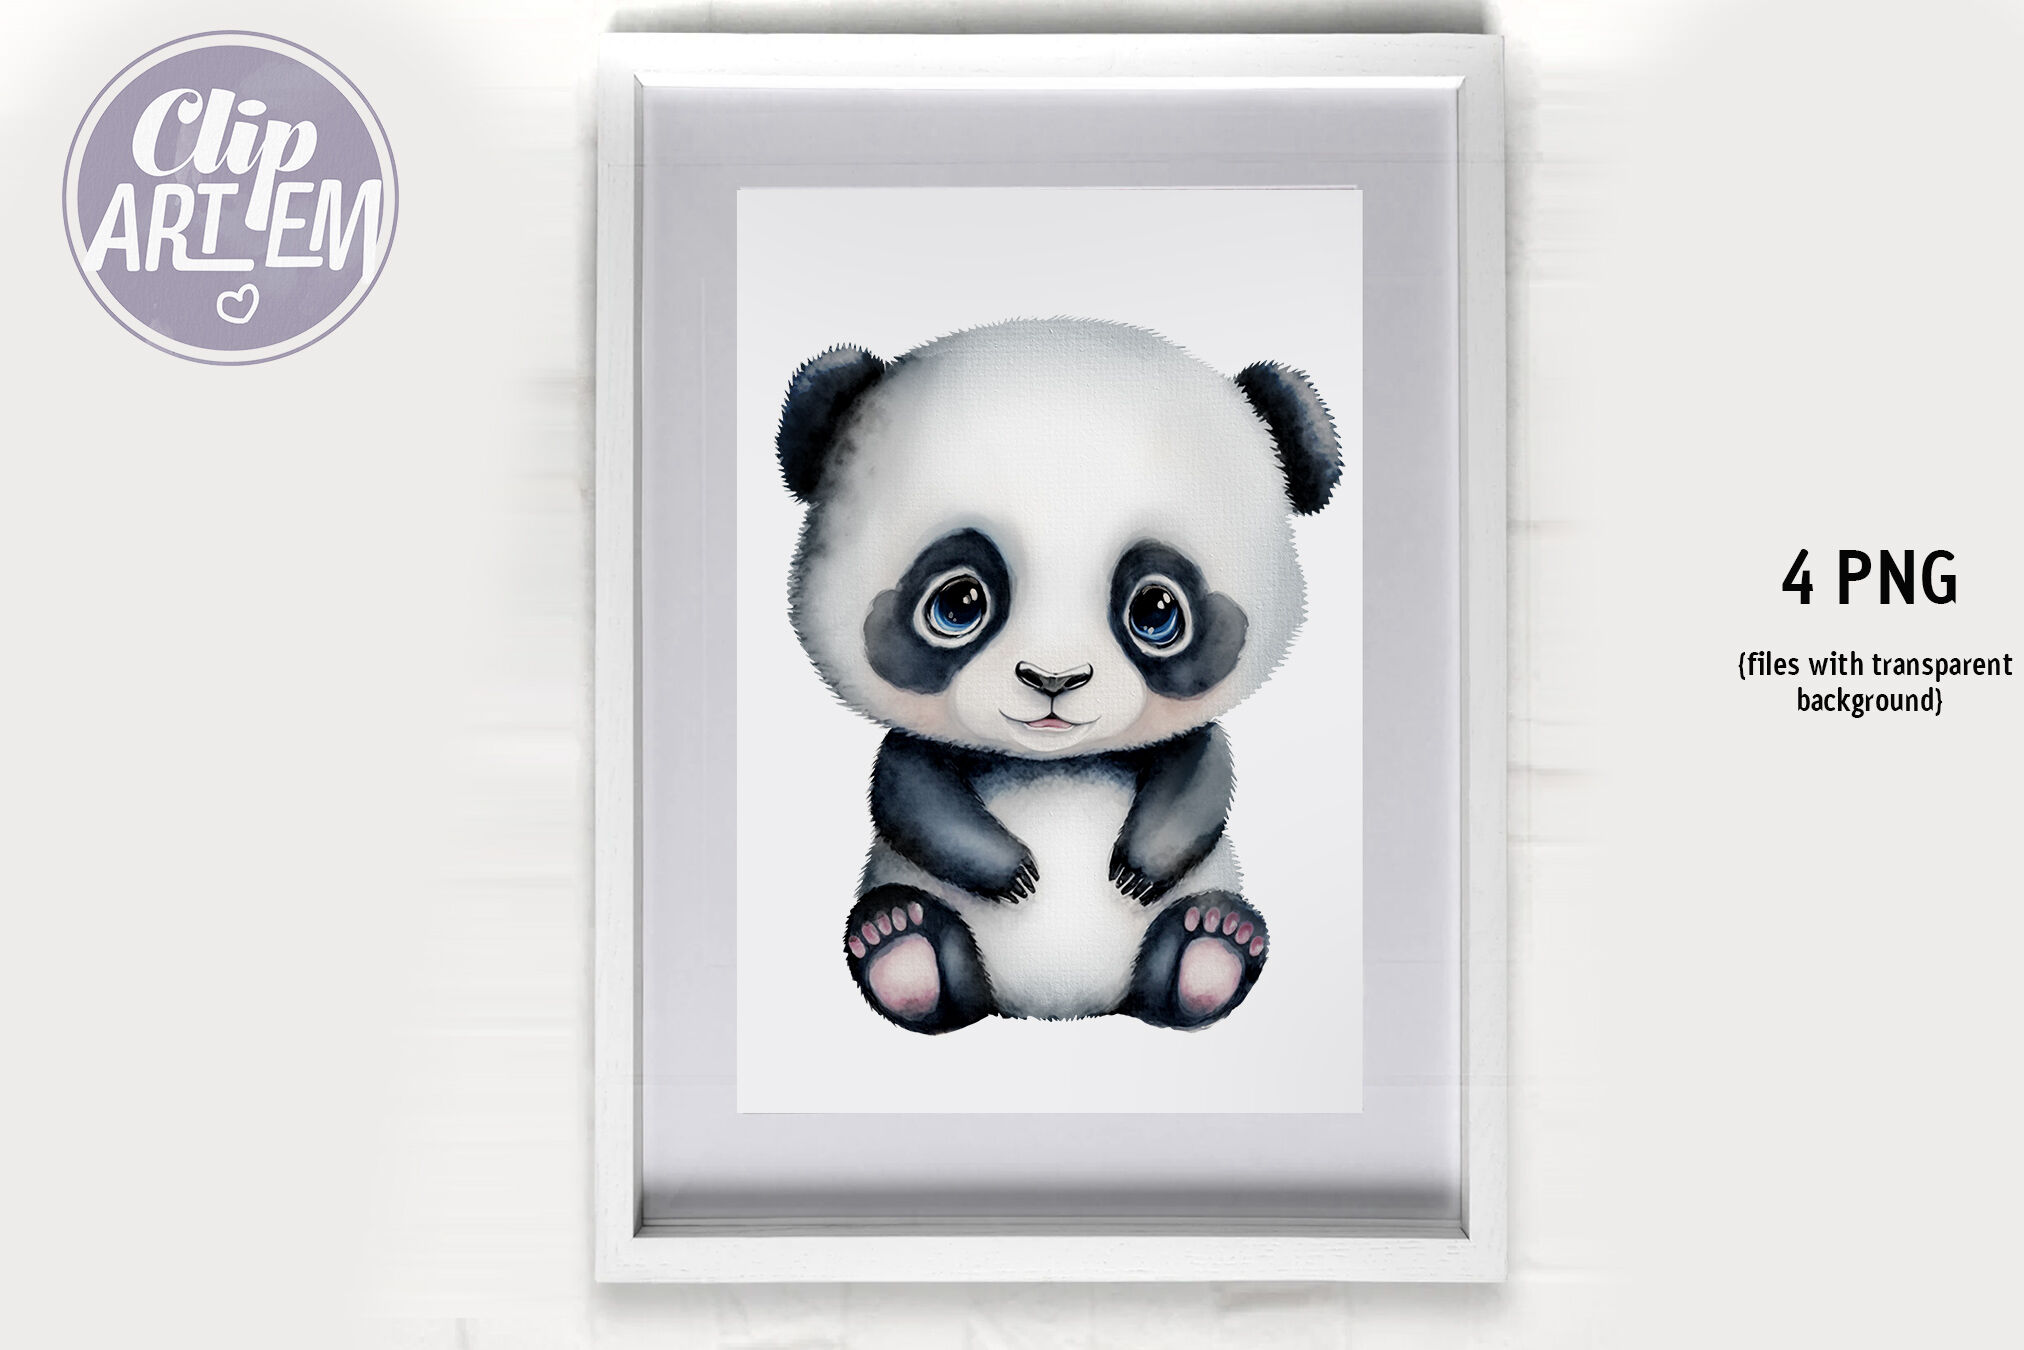 Poster Aesthetic Panda Drawing Canvas Painting Children's Room Wall Art  Print Beautiful Animal Pandas Picture Decor No Frame 20 x 28 Inches (50 x  70 cm) : Amazon.de: Home & Kitchen